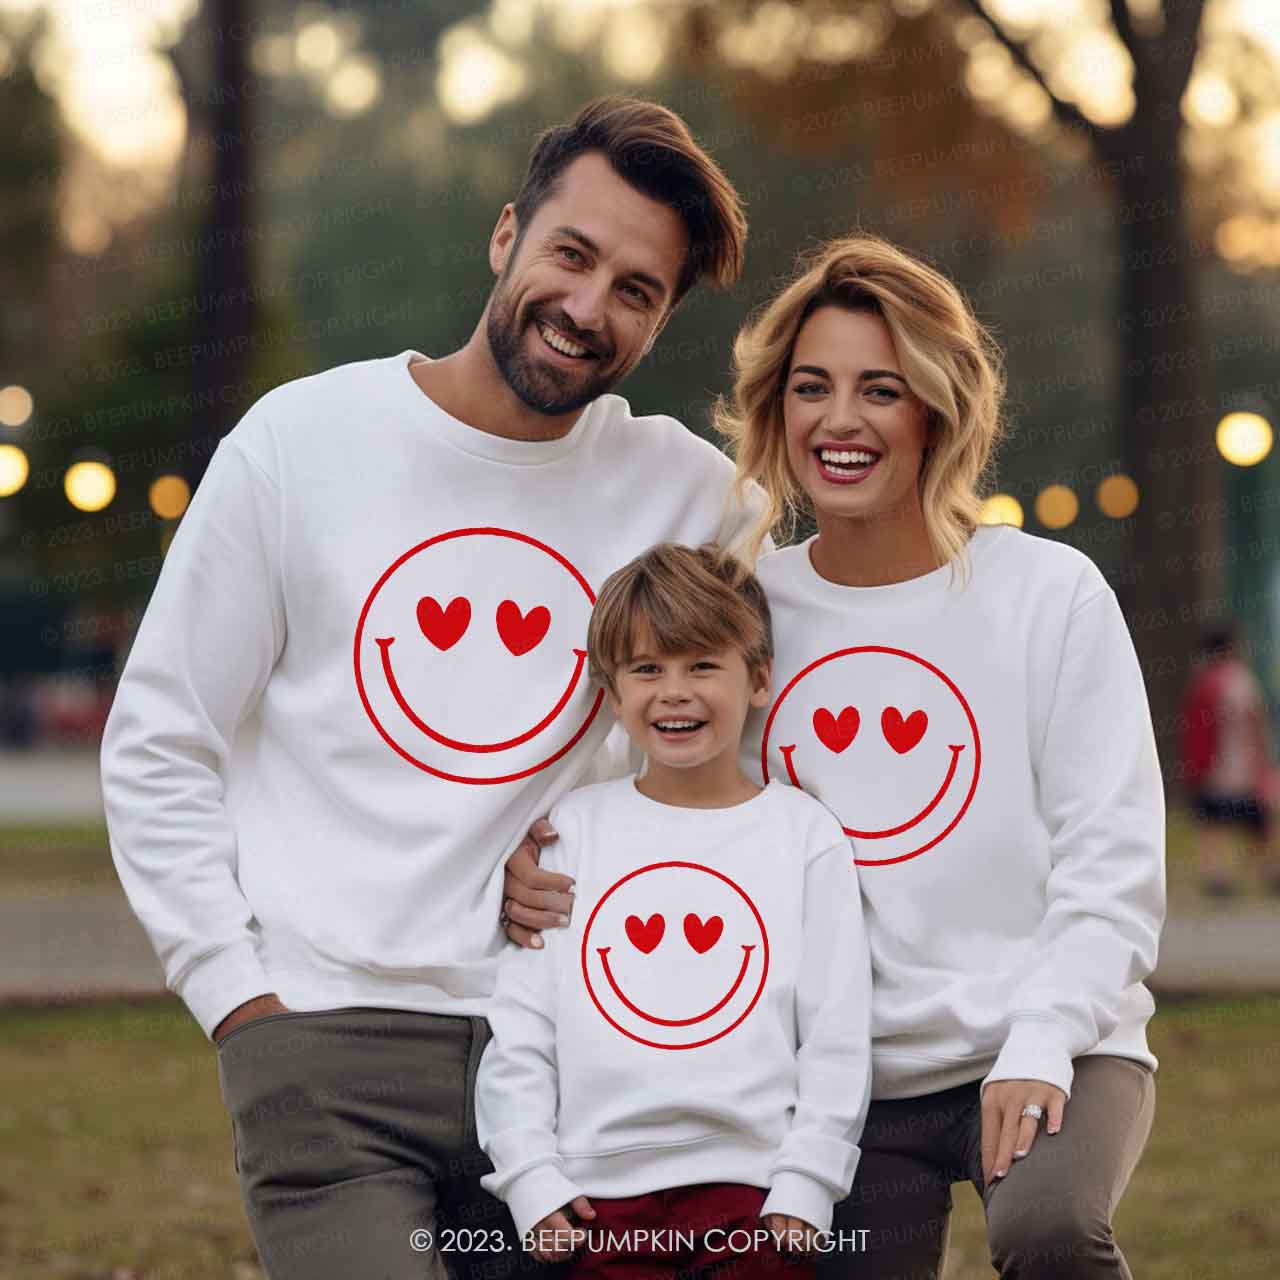 Cute Heart Face Valentine's Day Family Gift Sweatshirts